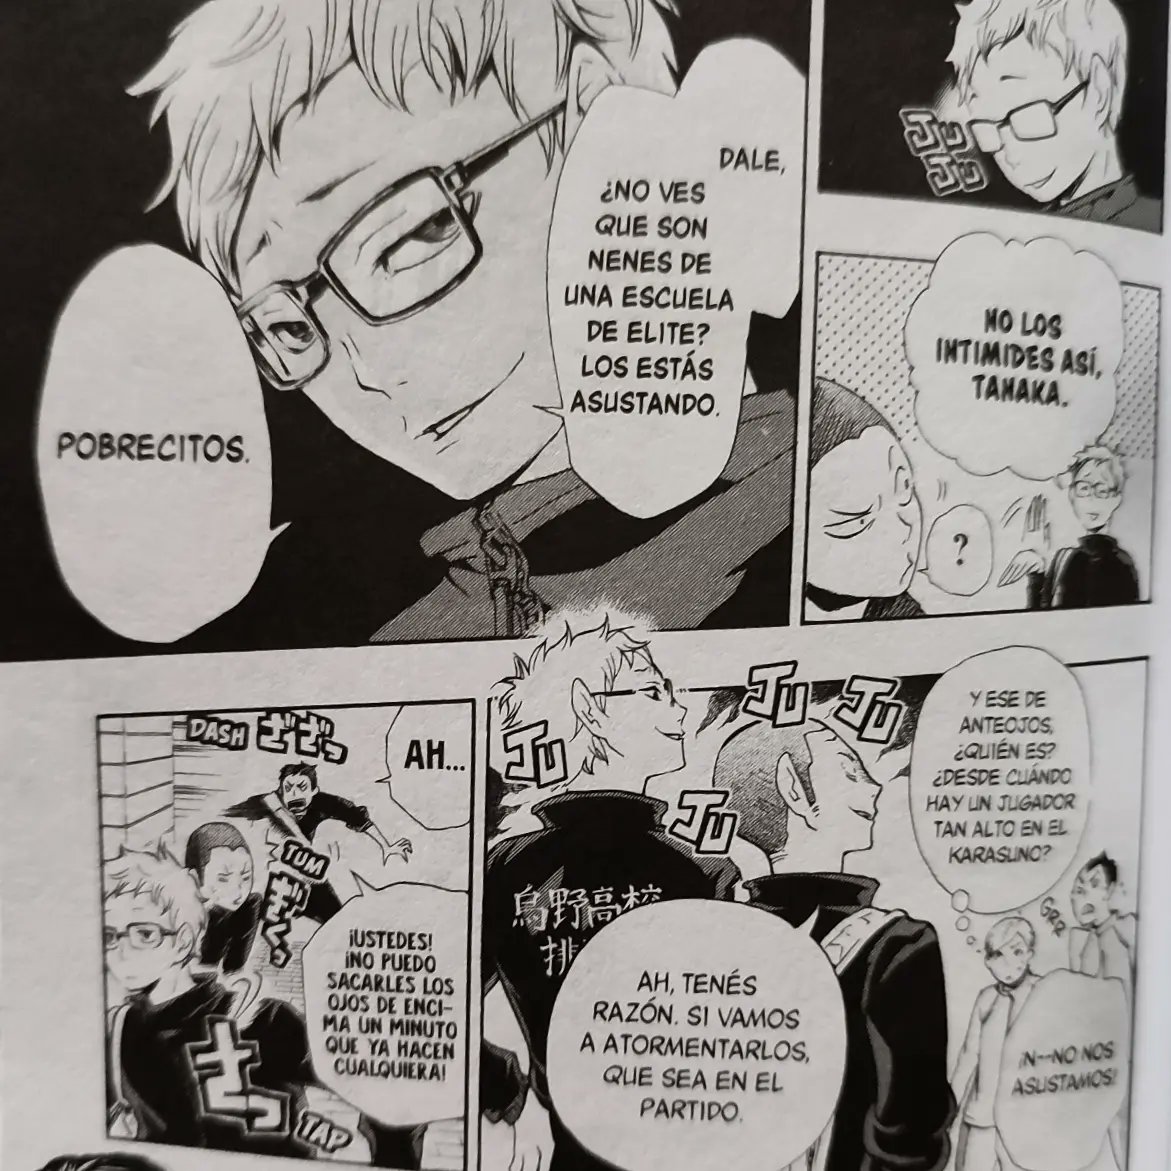 So far, loving @ivreality 's Haikyu edition, the dialogues are turning out so well!
Can't help but giggle at Oikawa talking with Argentinian accent tho, destiny is calling you Toto~
(Only miss the honorifics, but it's a minor thing) 